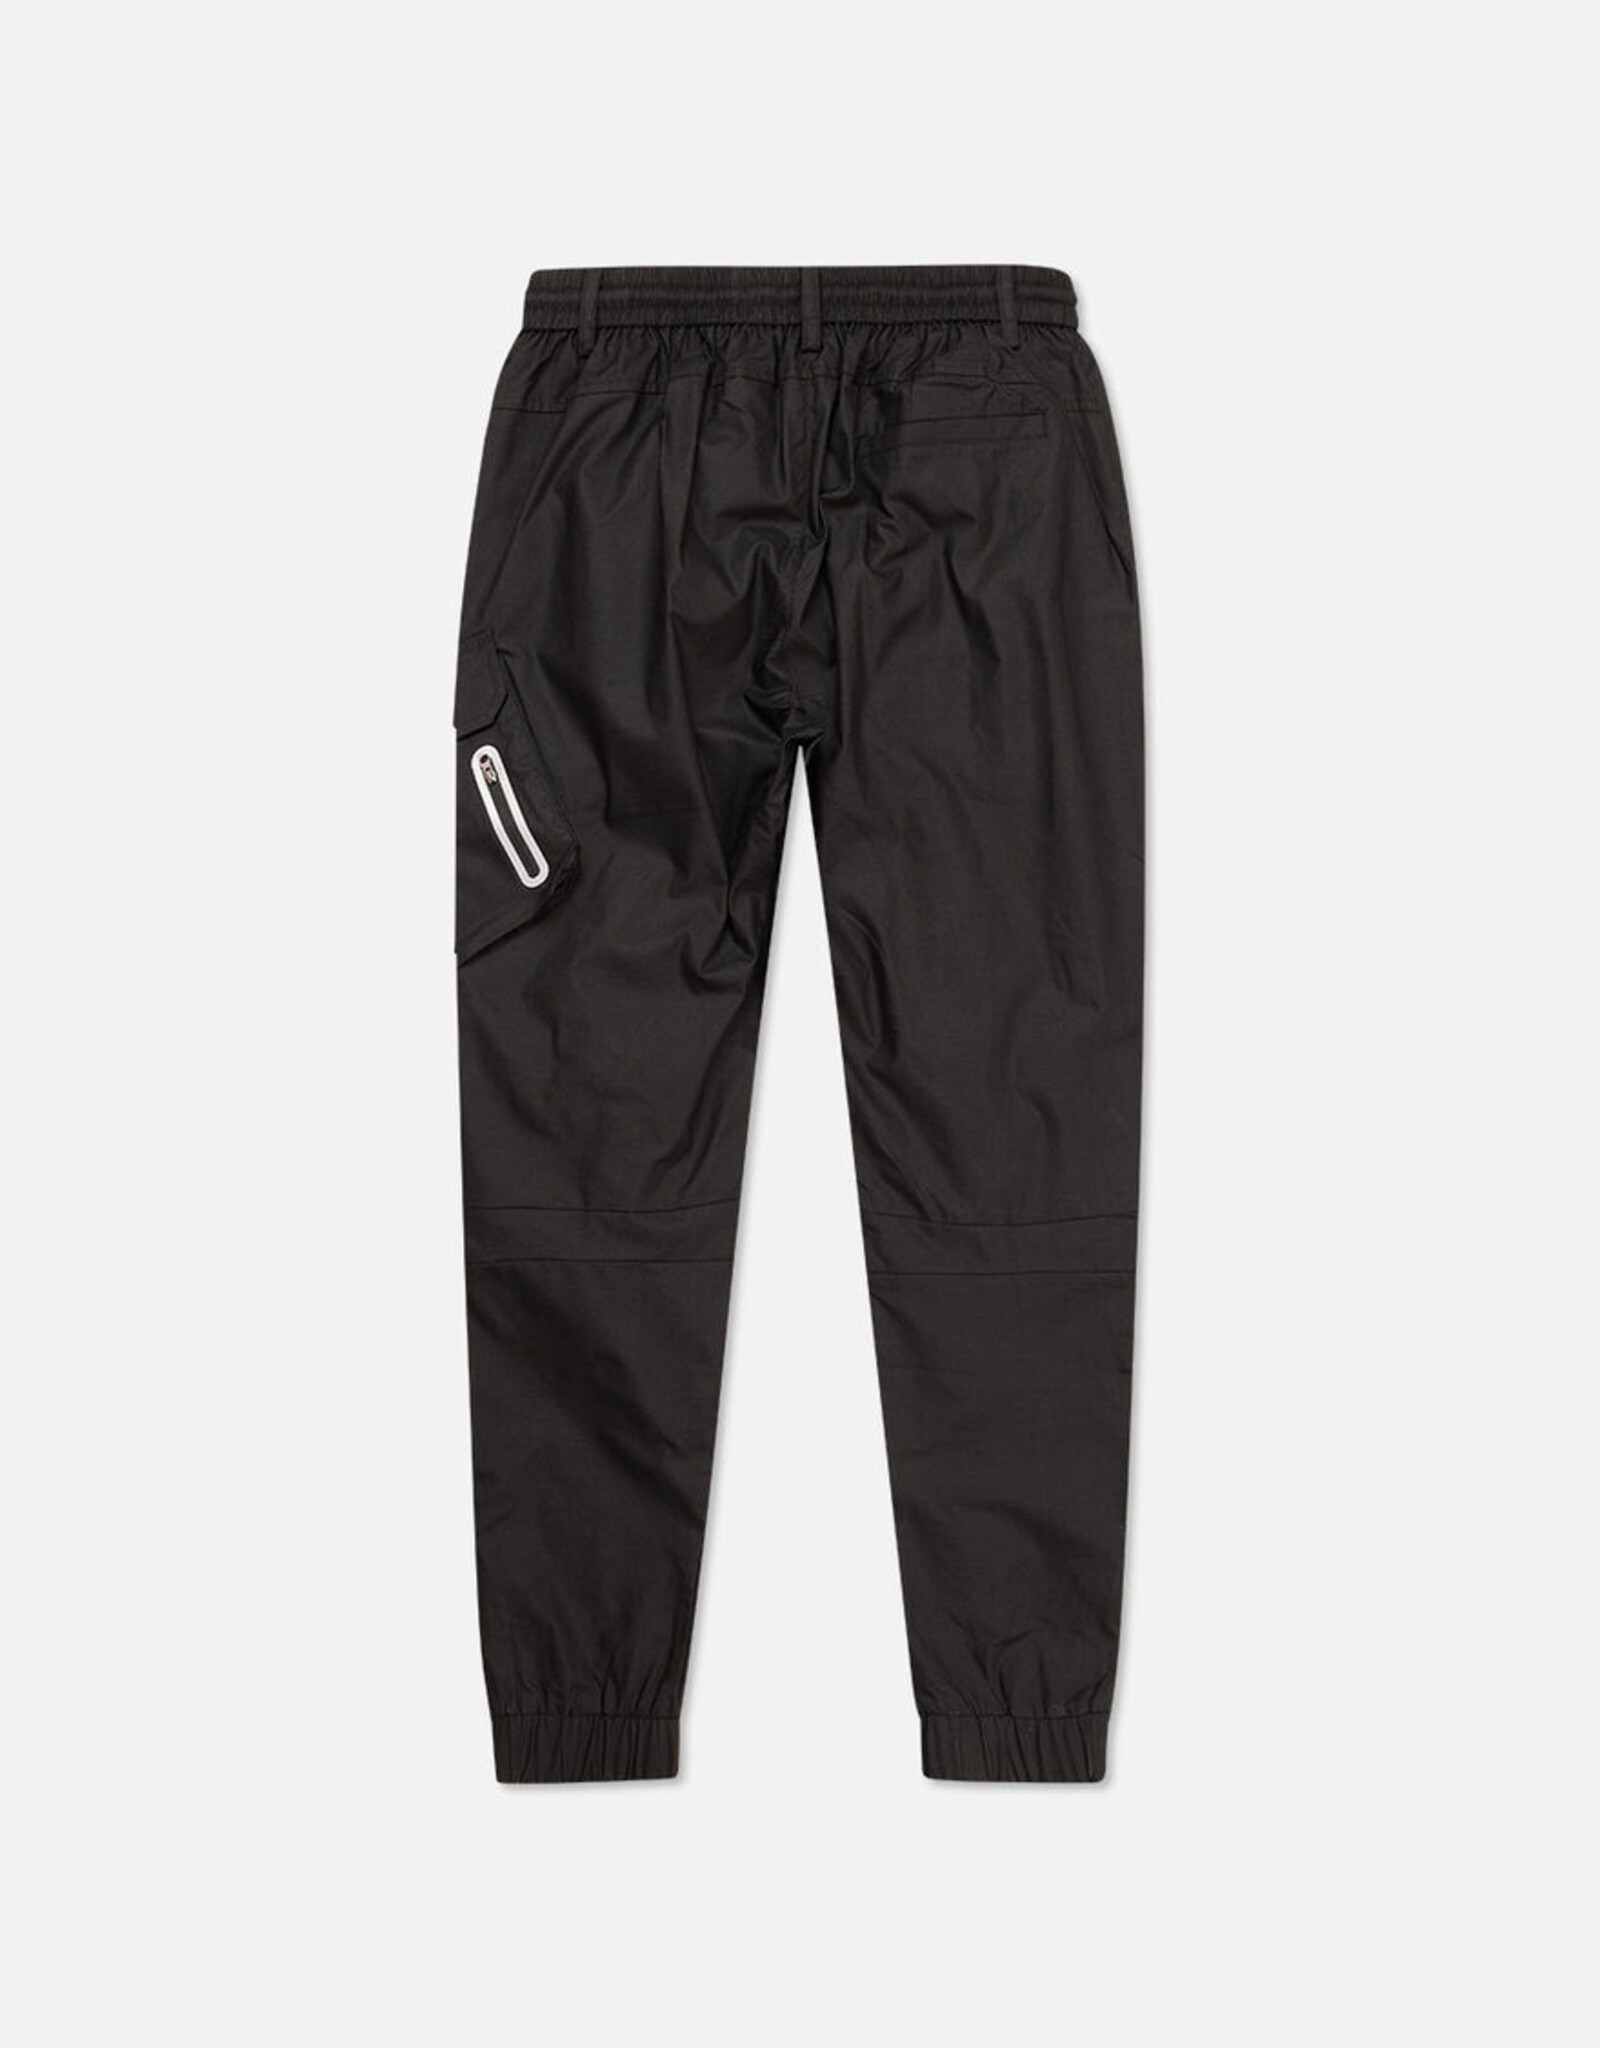 Off the pitch Tammy Woven Pants